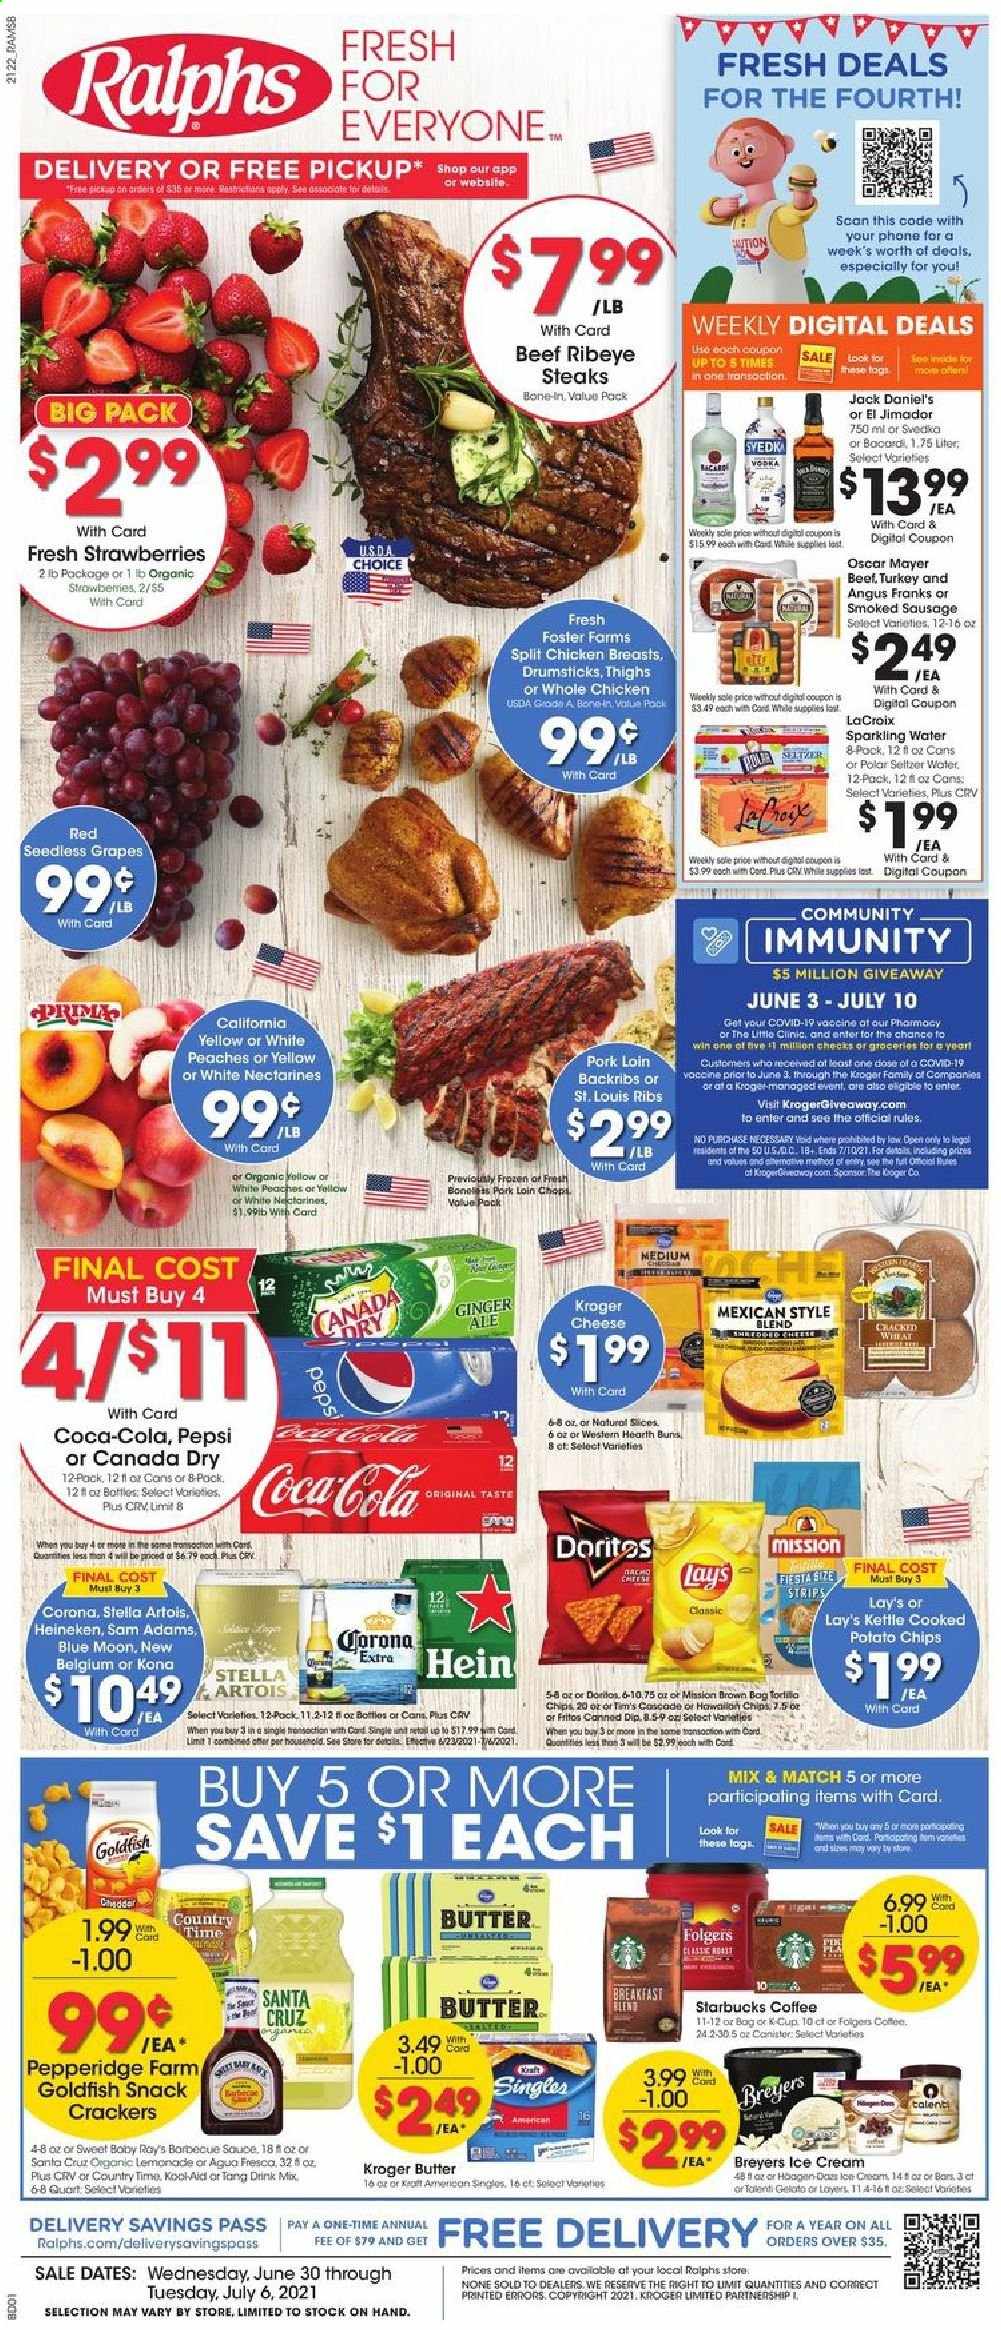 thumbnail - Ralphs Flyer - 06/30/2021 - 07/06/2021 - Sales products - seedless grapes, buns, grapes, strawberries, Jack Daniel's, Oscar Mayer, sausage, smoked sausage, butter, dip, ice cream, gelato, strips, snack, crackers, Doritos, Fritos, potato chips, Lay’s, Goldfish, Canada Dry, Coca-Cola, ginger ale, lemonade, Pepsi, Country Time, seltzer water, sparkling water, coffee, Starbucks, Folgers, coffee capsules, K-Cups, beer, Stella Artois, Blue Moon, Corona Extra, Heineken, whole chicken, chicken breasts, beef meat, steak, ribeye steak, pork chops, pork loin, pork meat, nectarines, peaches. Page 1.